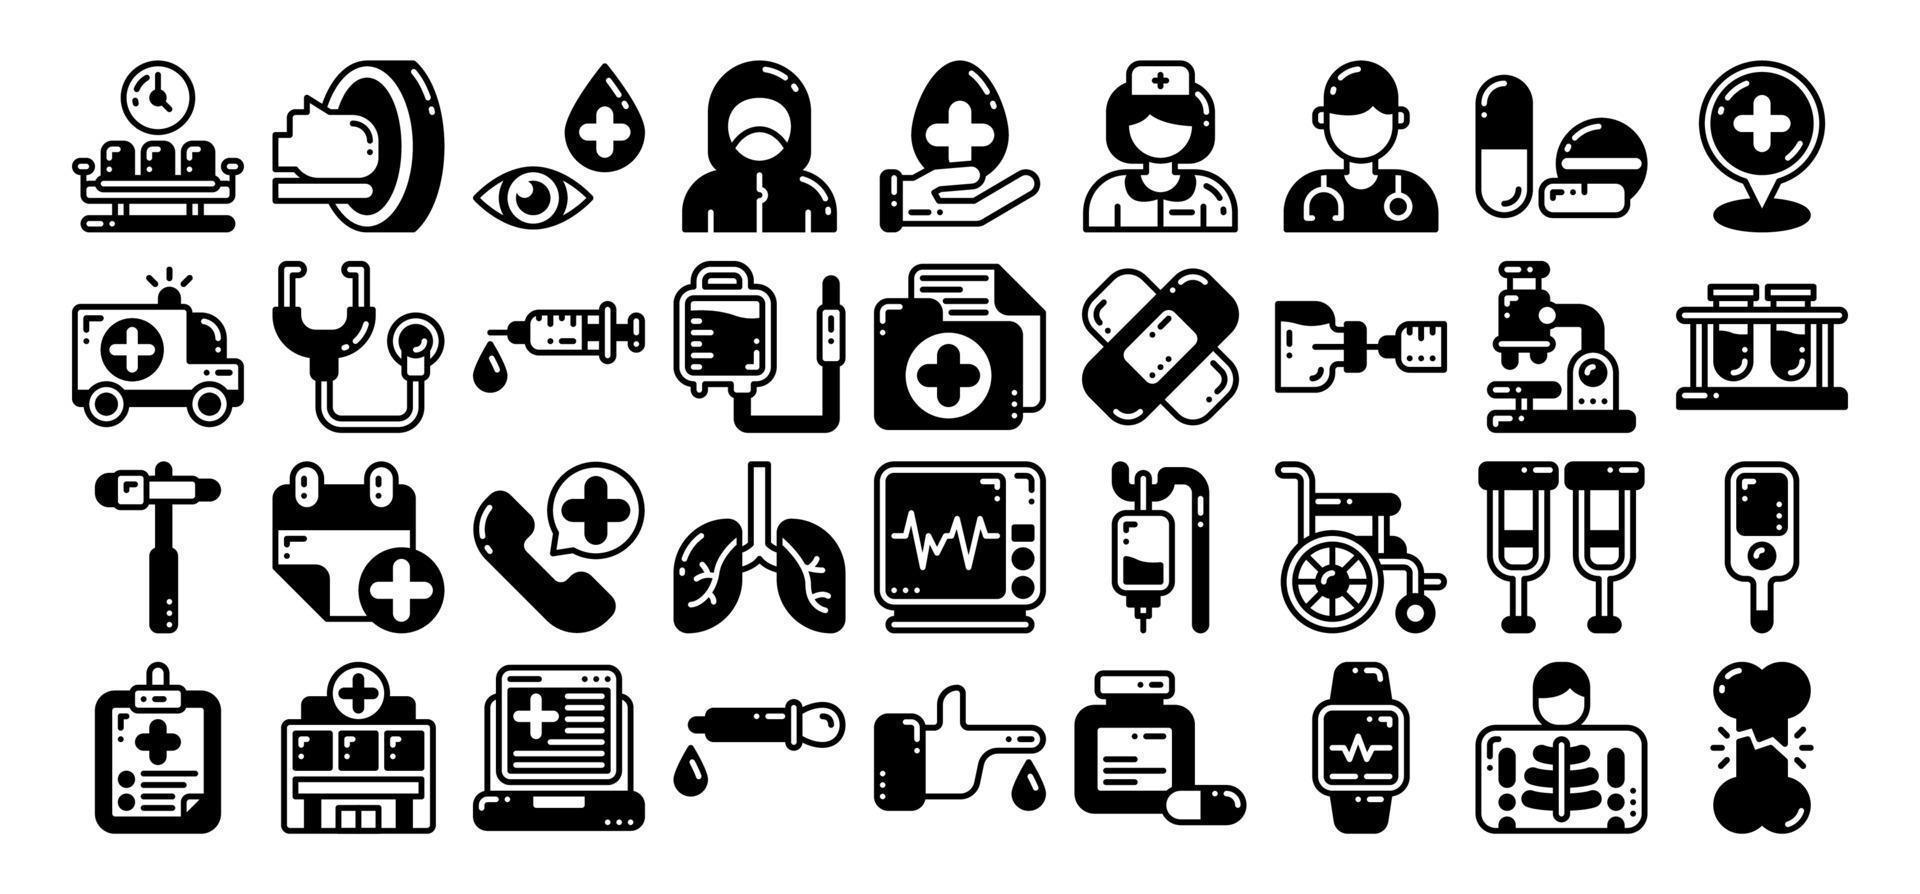 medicine and health icon set. vector illustration in the solid style